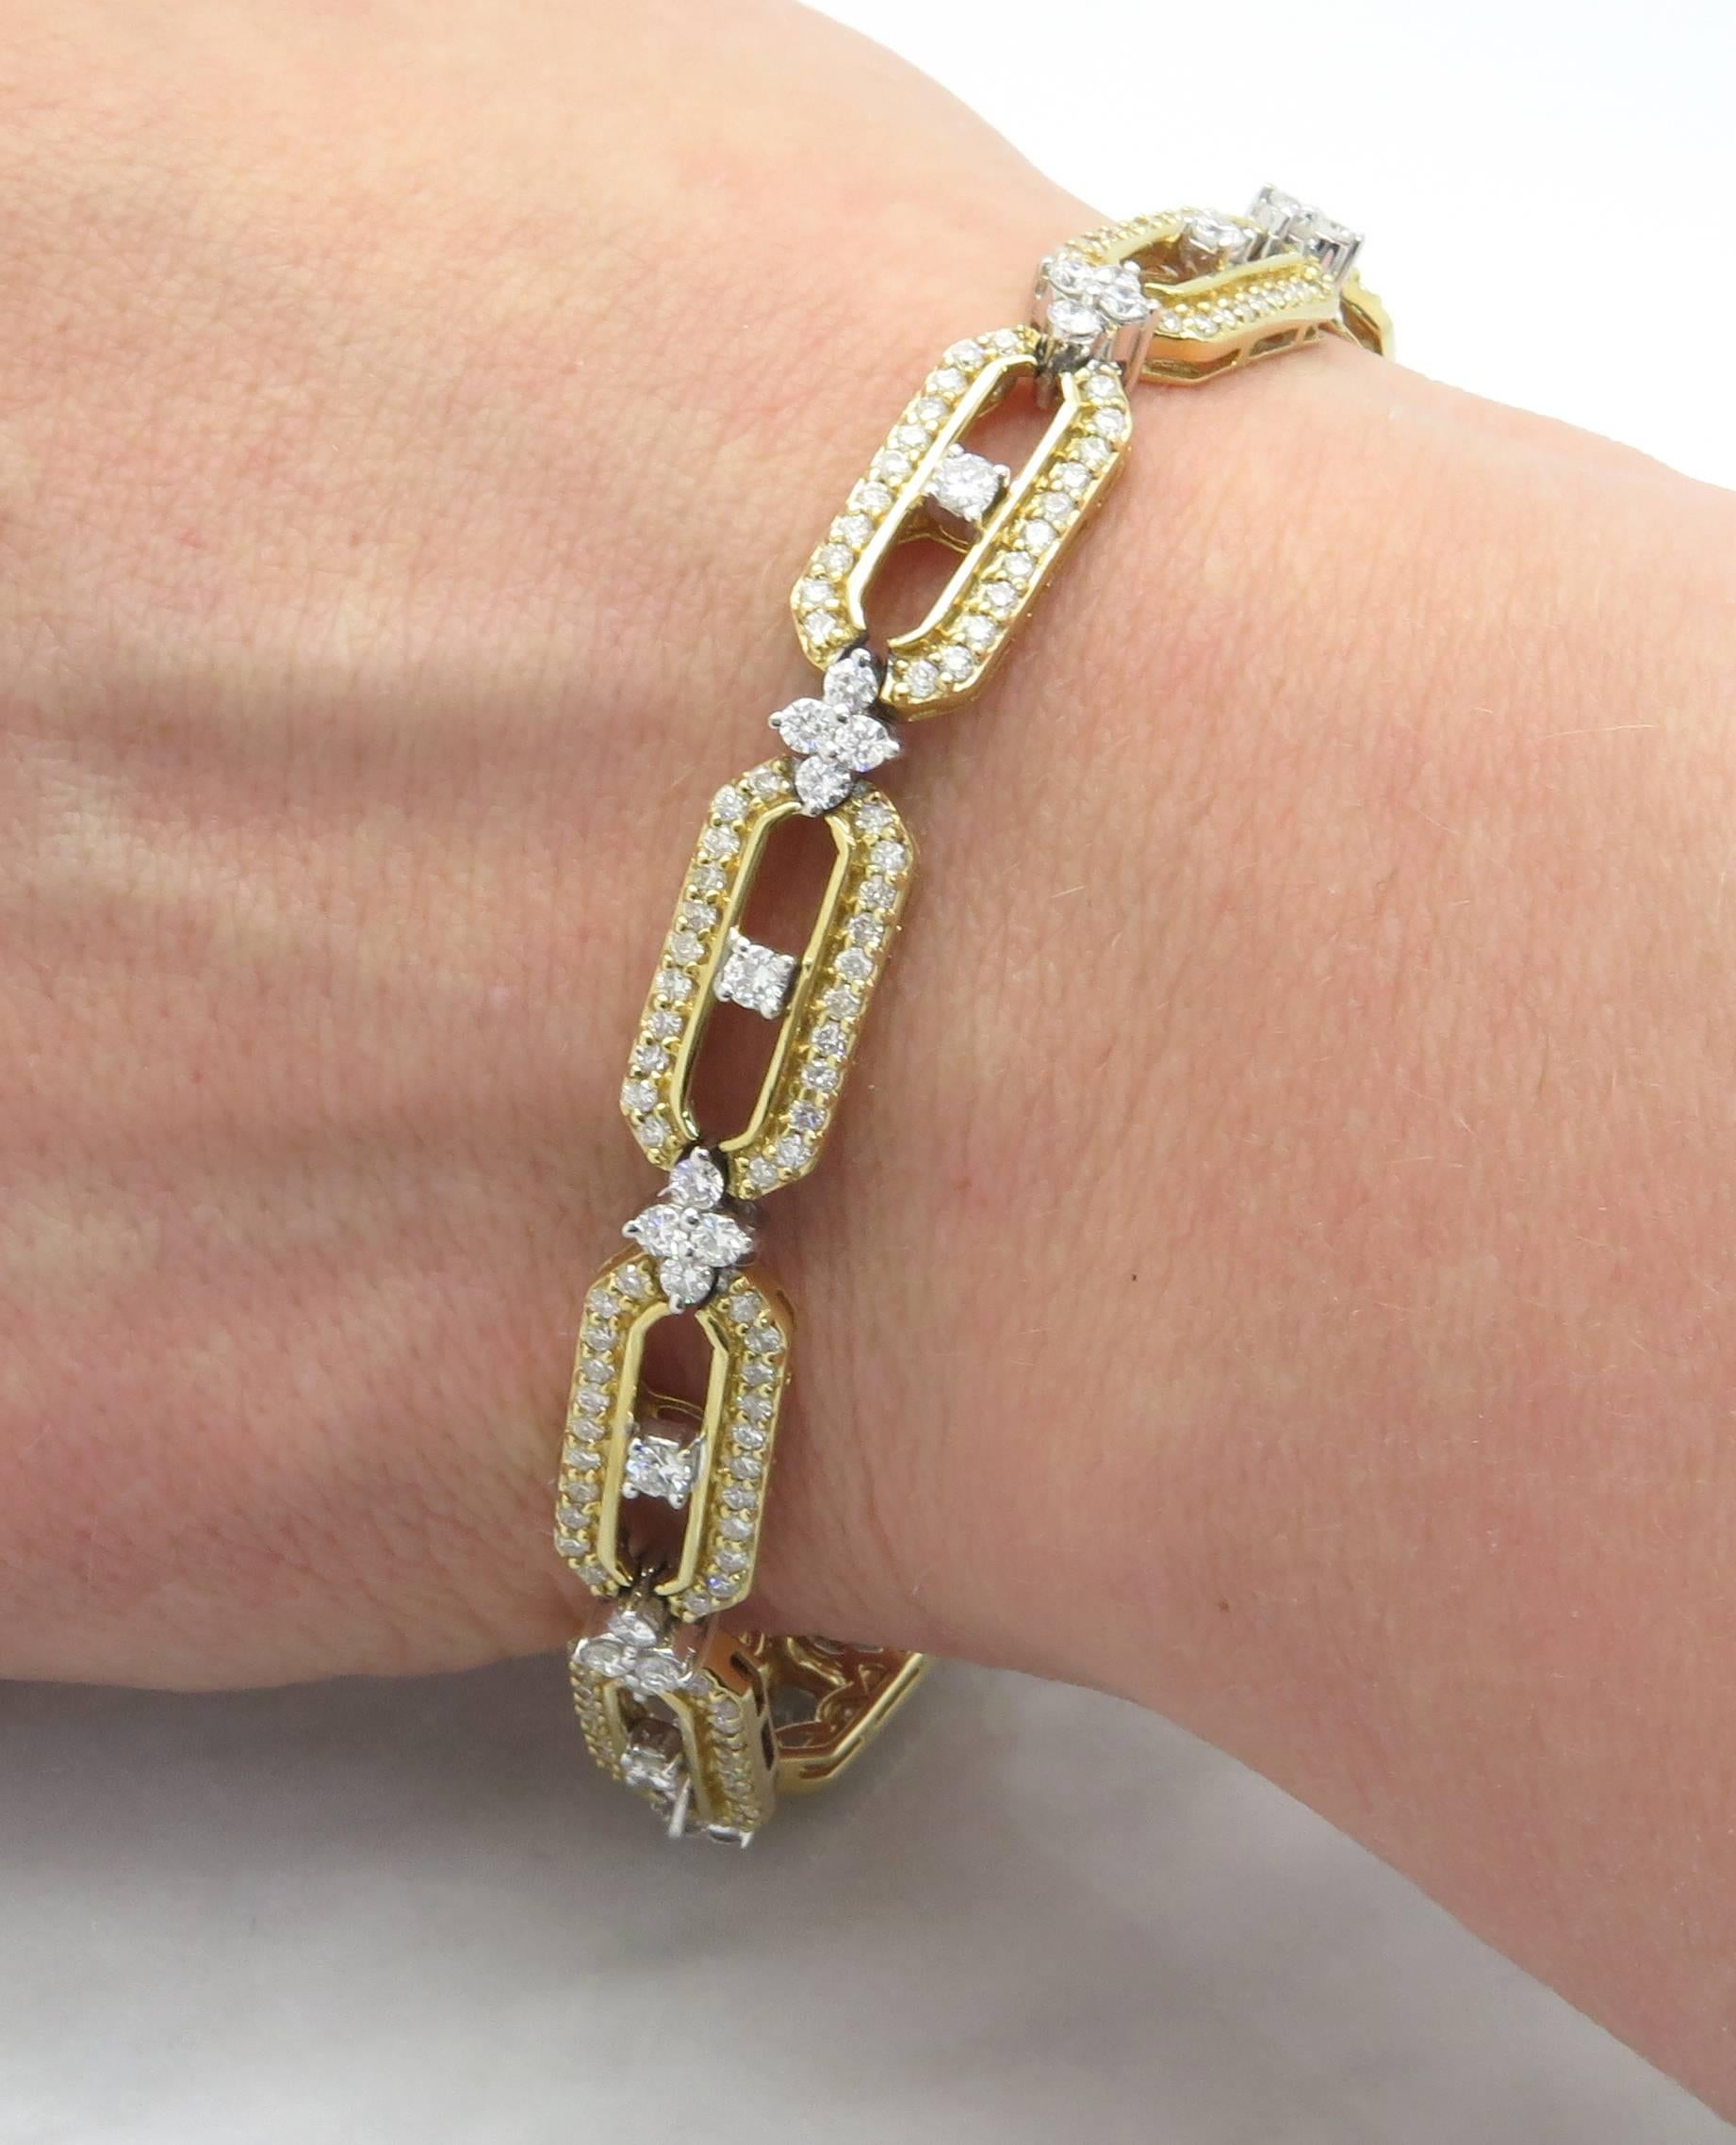 This beautiful bracelet features 268 Round Brilliant Cut Diamonds set into 14k Yellow Gold. The Bracelet features a unique design of links and star-bursts. The diamonds have H-K color and I clarity. The total diamond weight is approximately 4.00CTW.